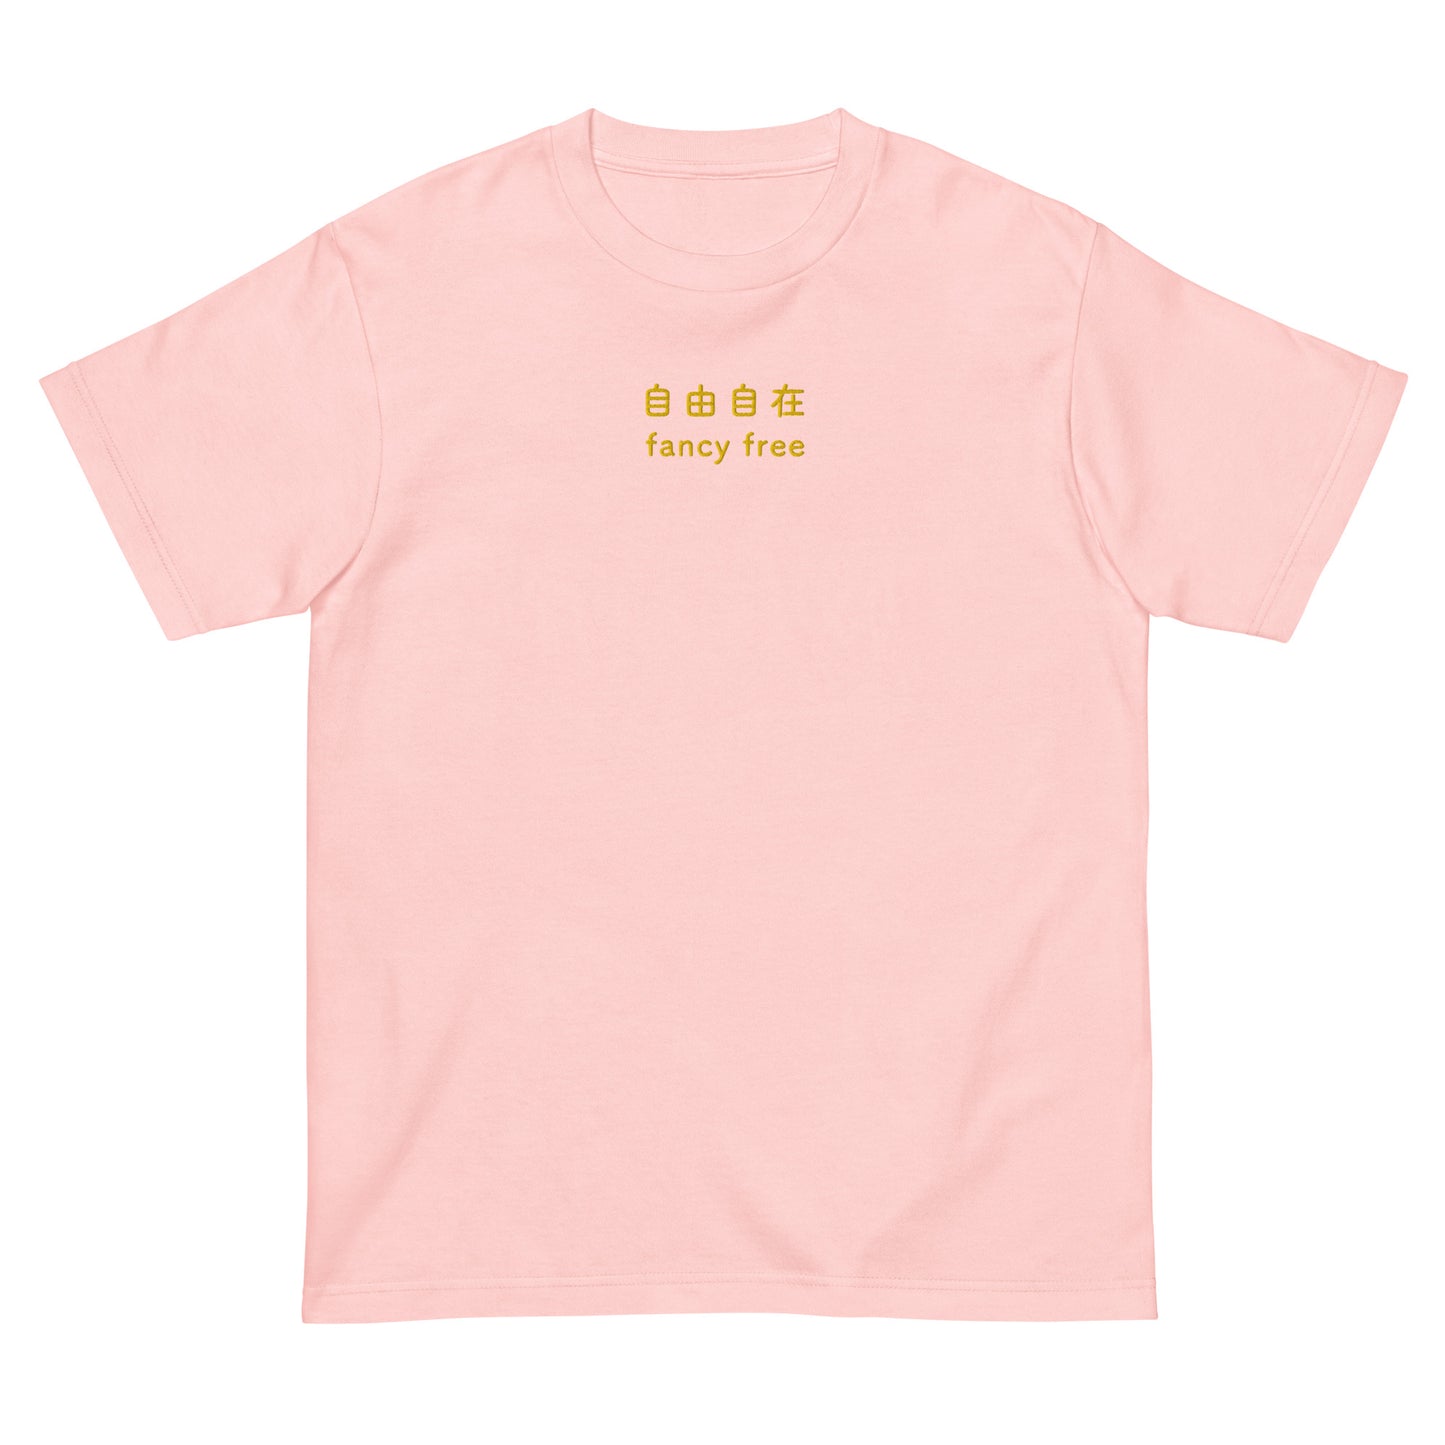 Pink High Quality Tee - Front Design with an Yellow Embroidery "Fancy Free" in Japanese,Chinese and English